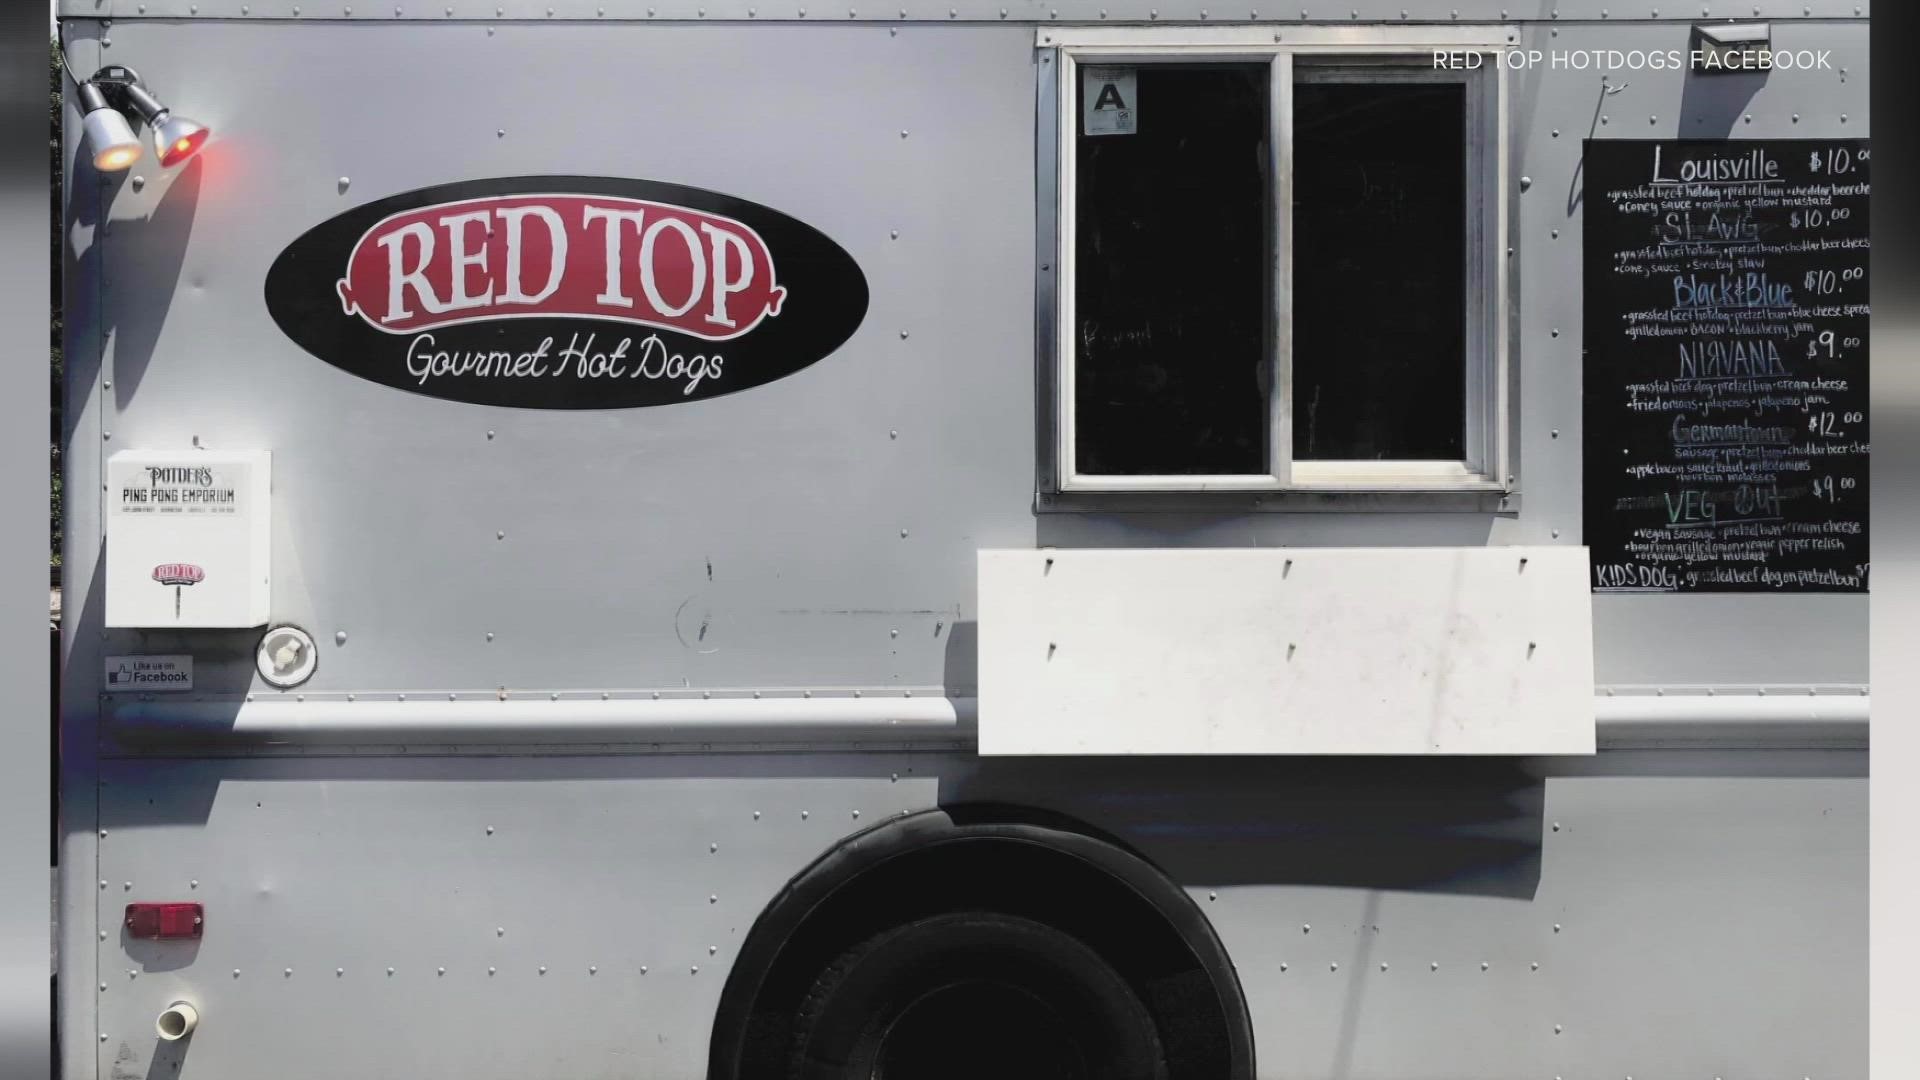 After opening in 2018, the hot dog shop announced their last day in their building is Sept. 21 but said they will focus their energy on their food truck.